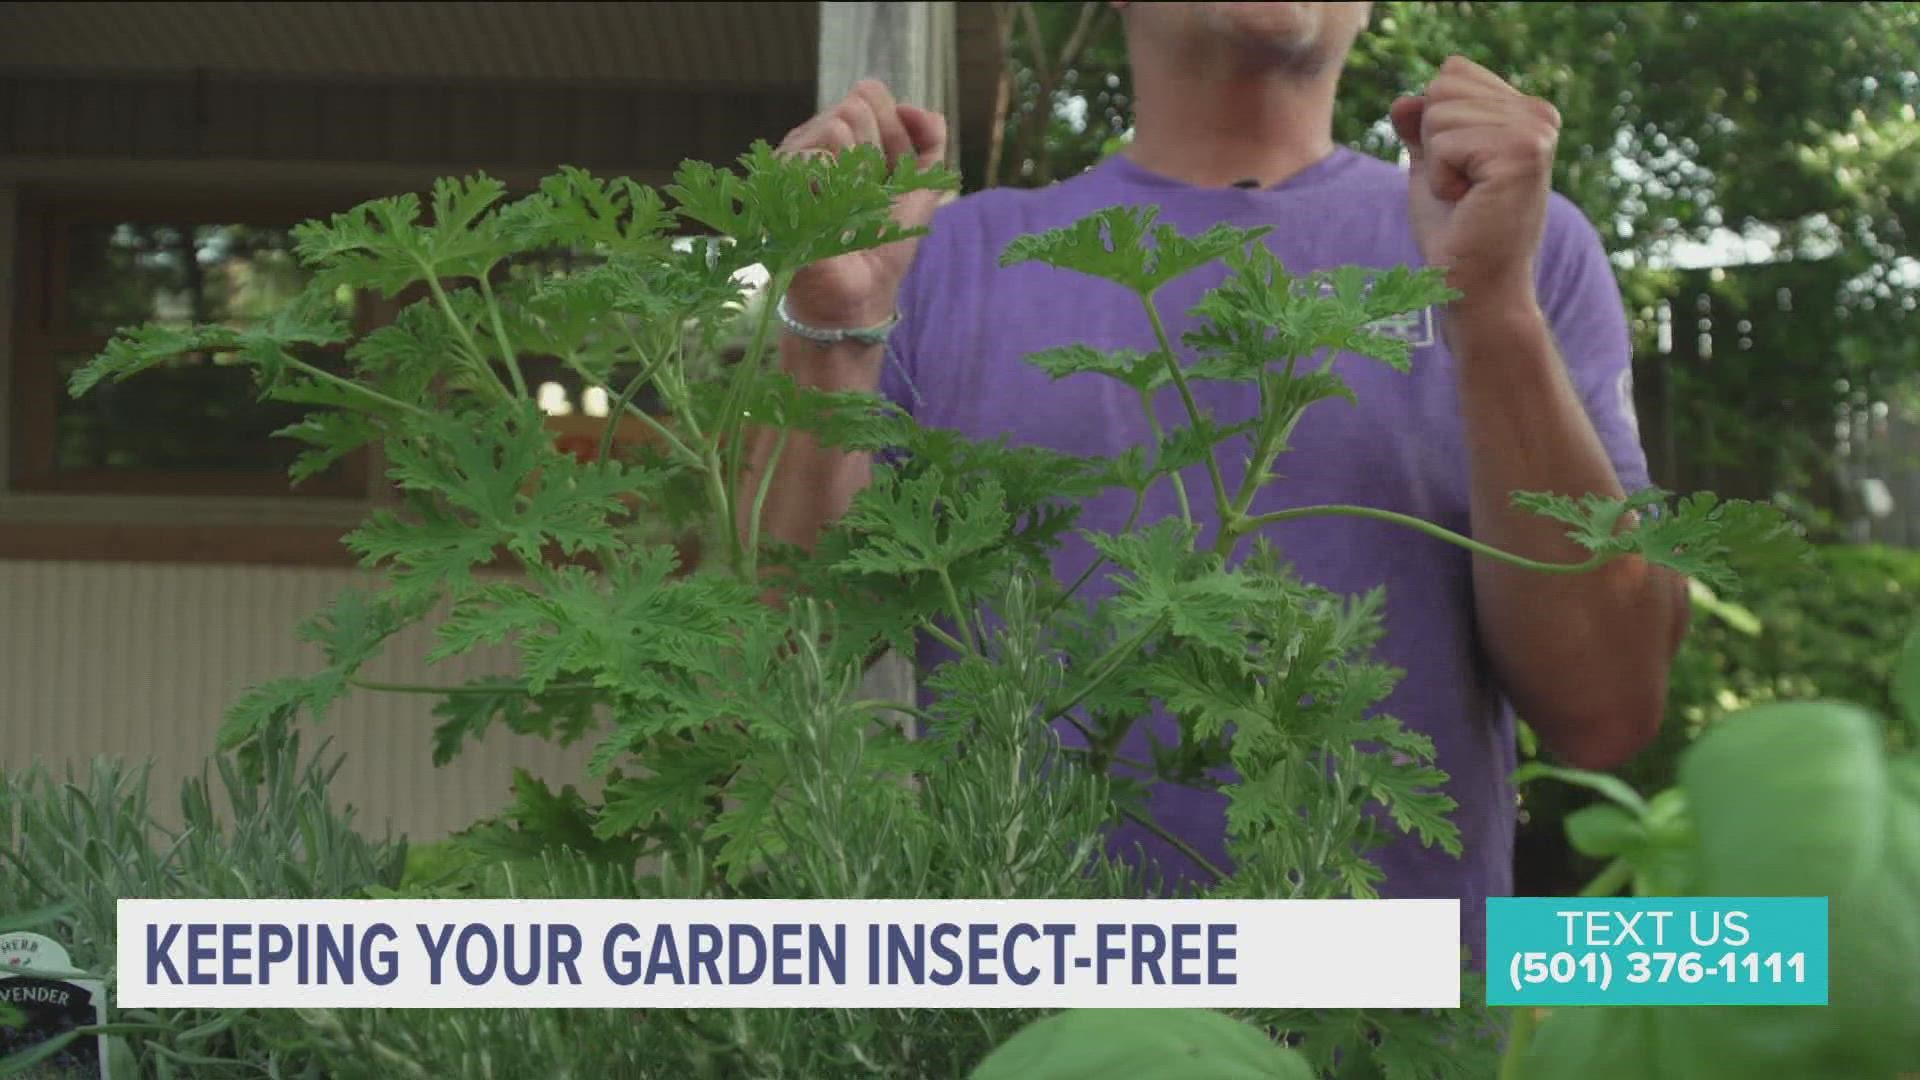 Chris H. Olsen with Botanica Gardens and Plantopia shares his best tips and tricks for anyone wanting to keep insects away!